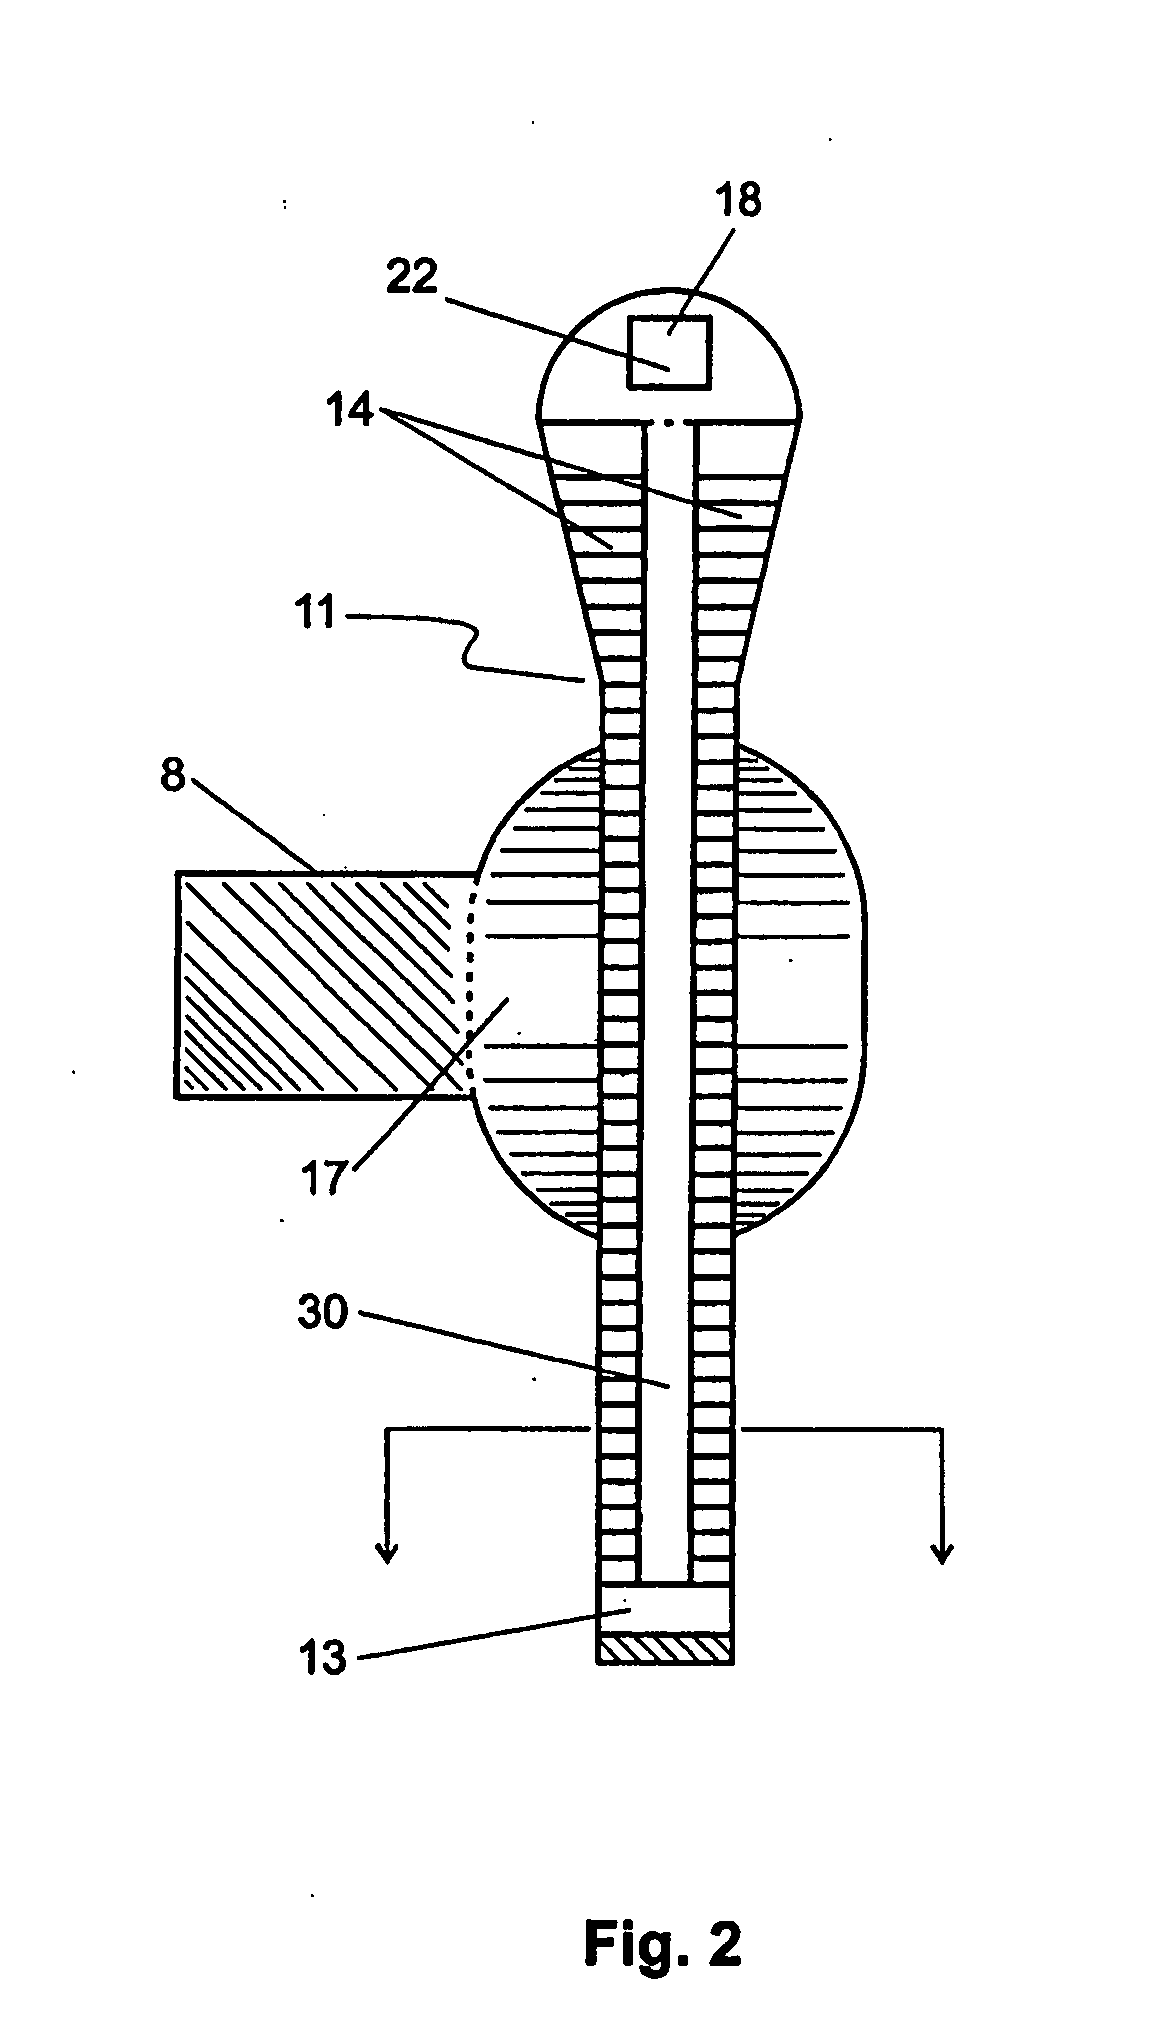 Umbilical cord clamp and methods of using same